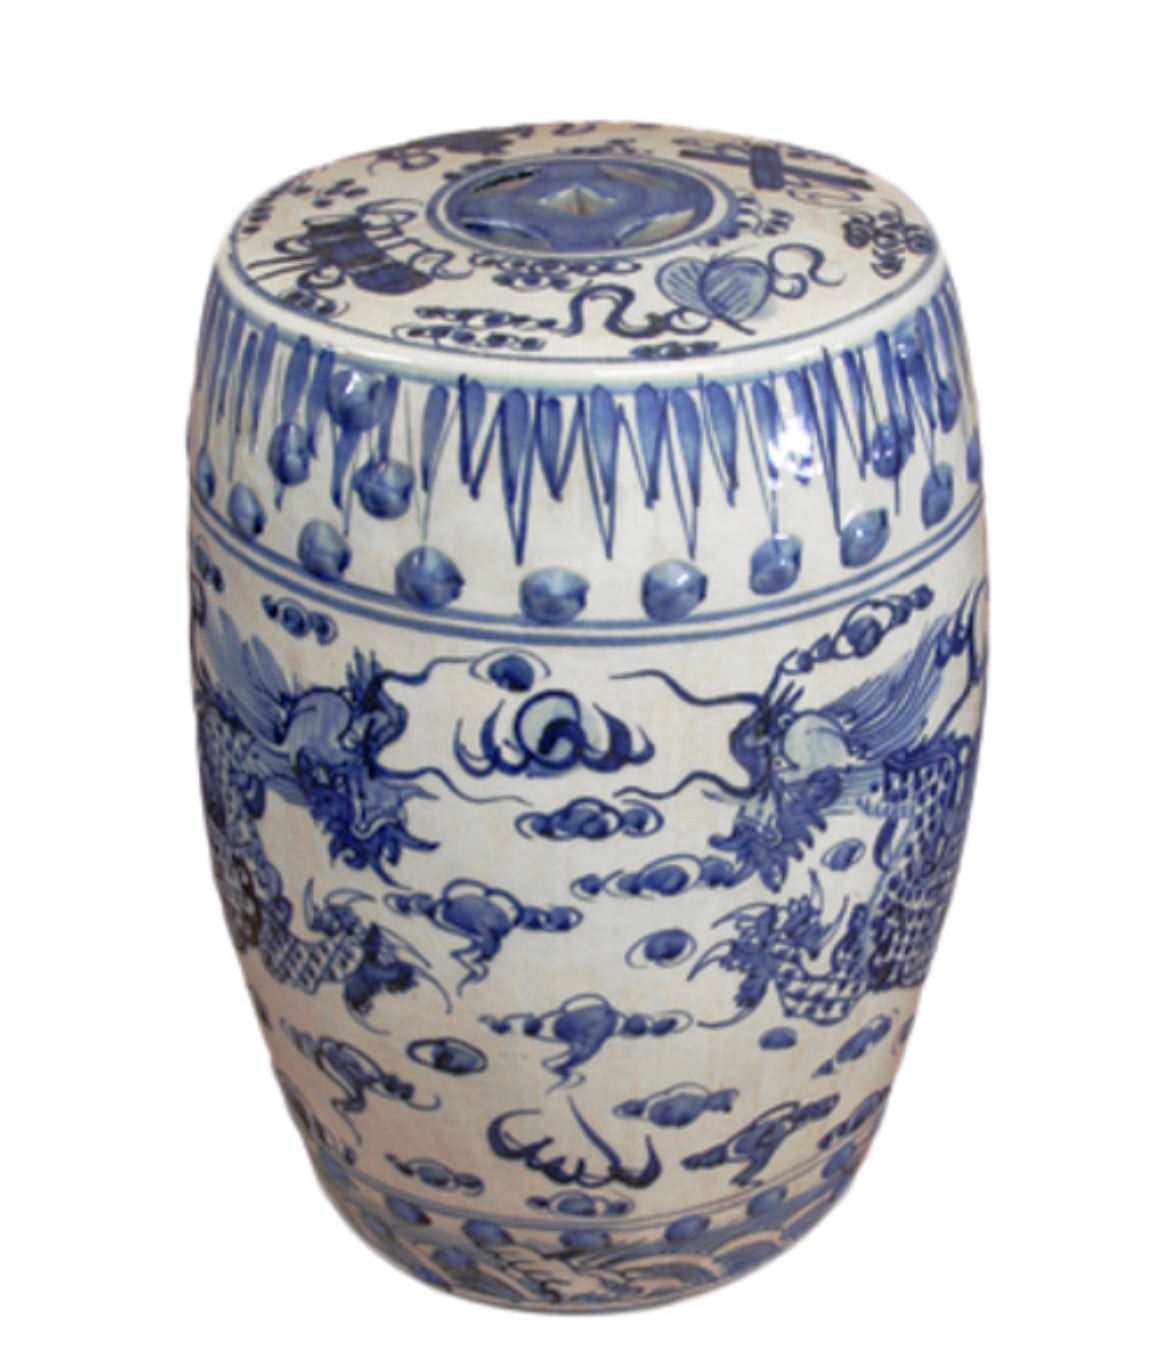 Antique-Style Blue and White Garden Stool with Dragons, 18”